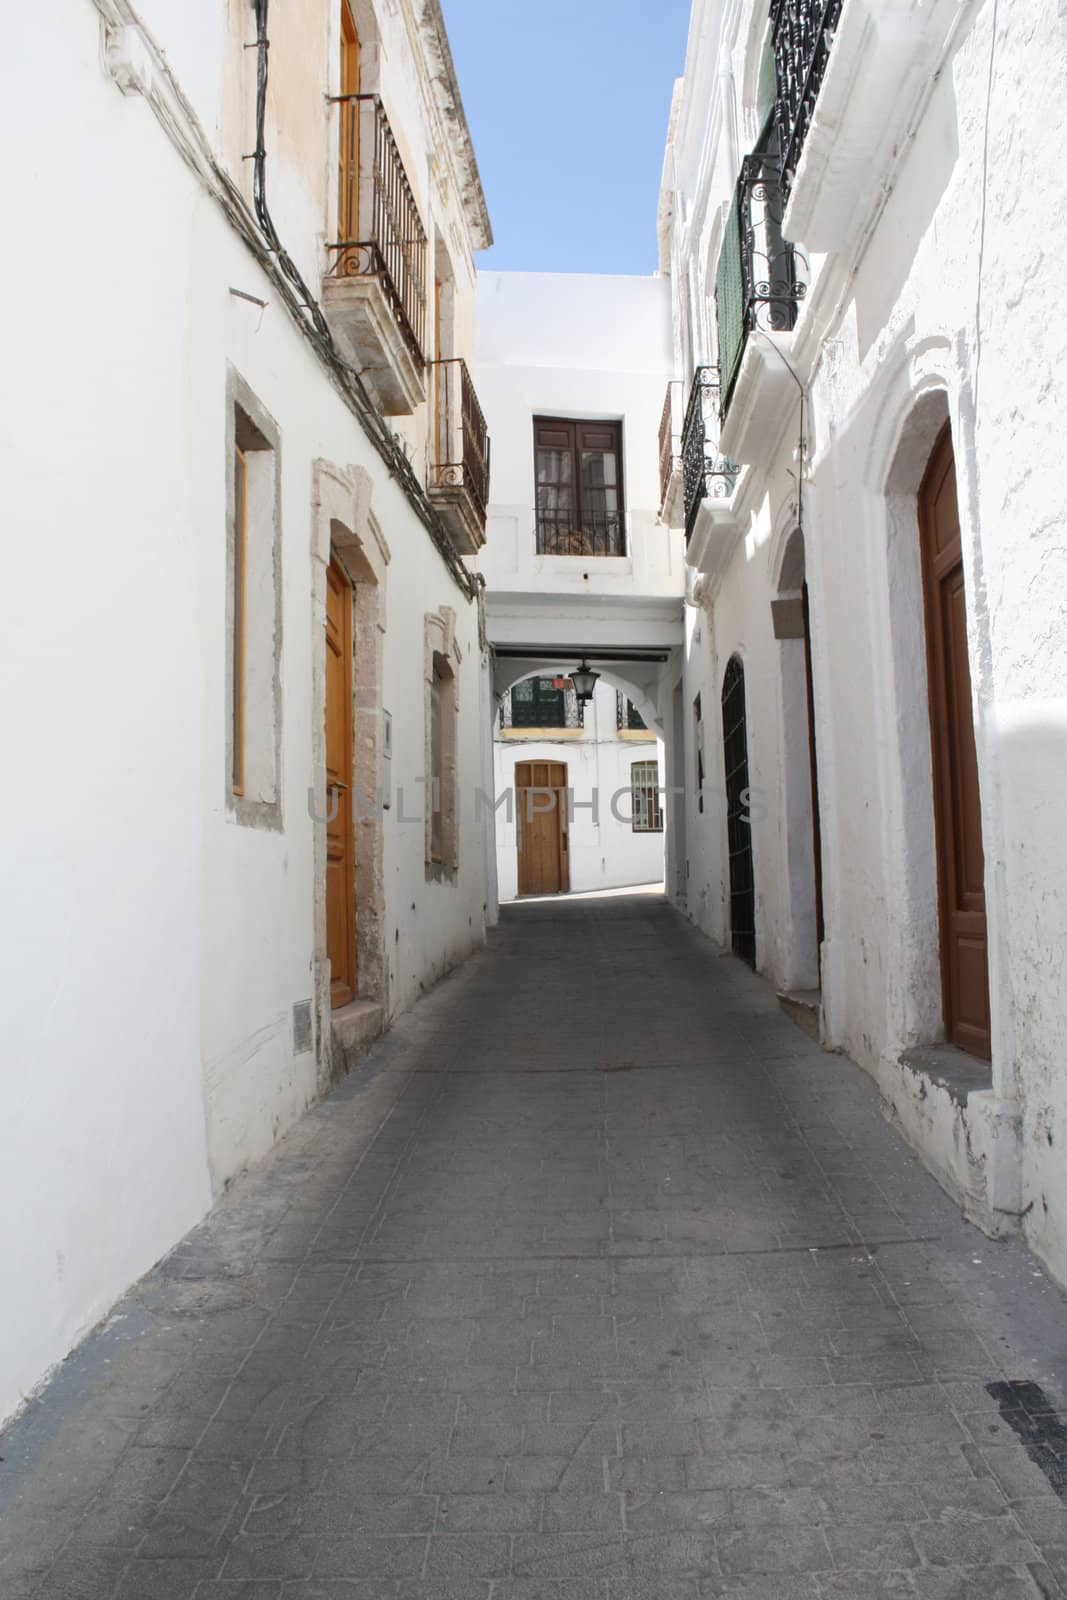 A typical Andalusian street with whitewashed houses. Nijar, a village in the province of Almeria (Spain).